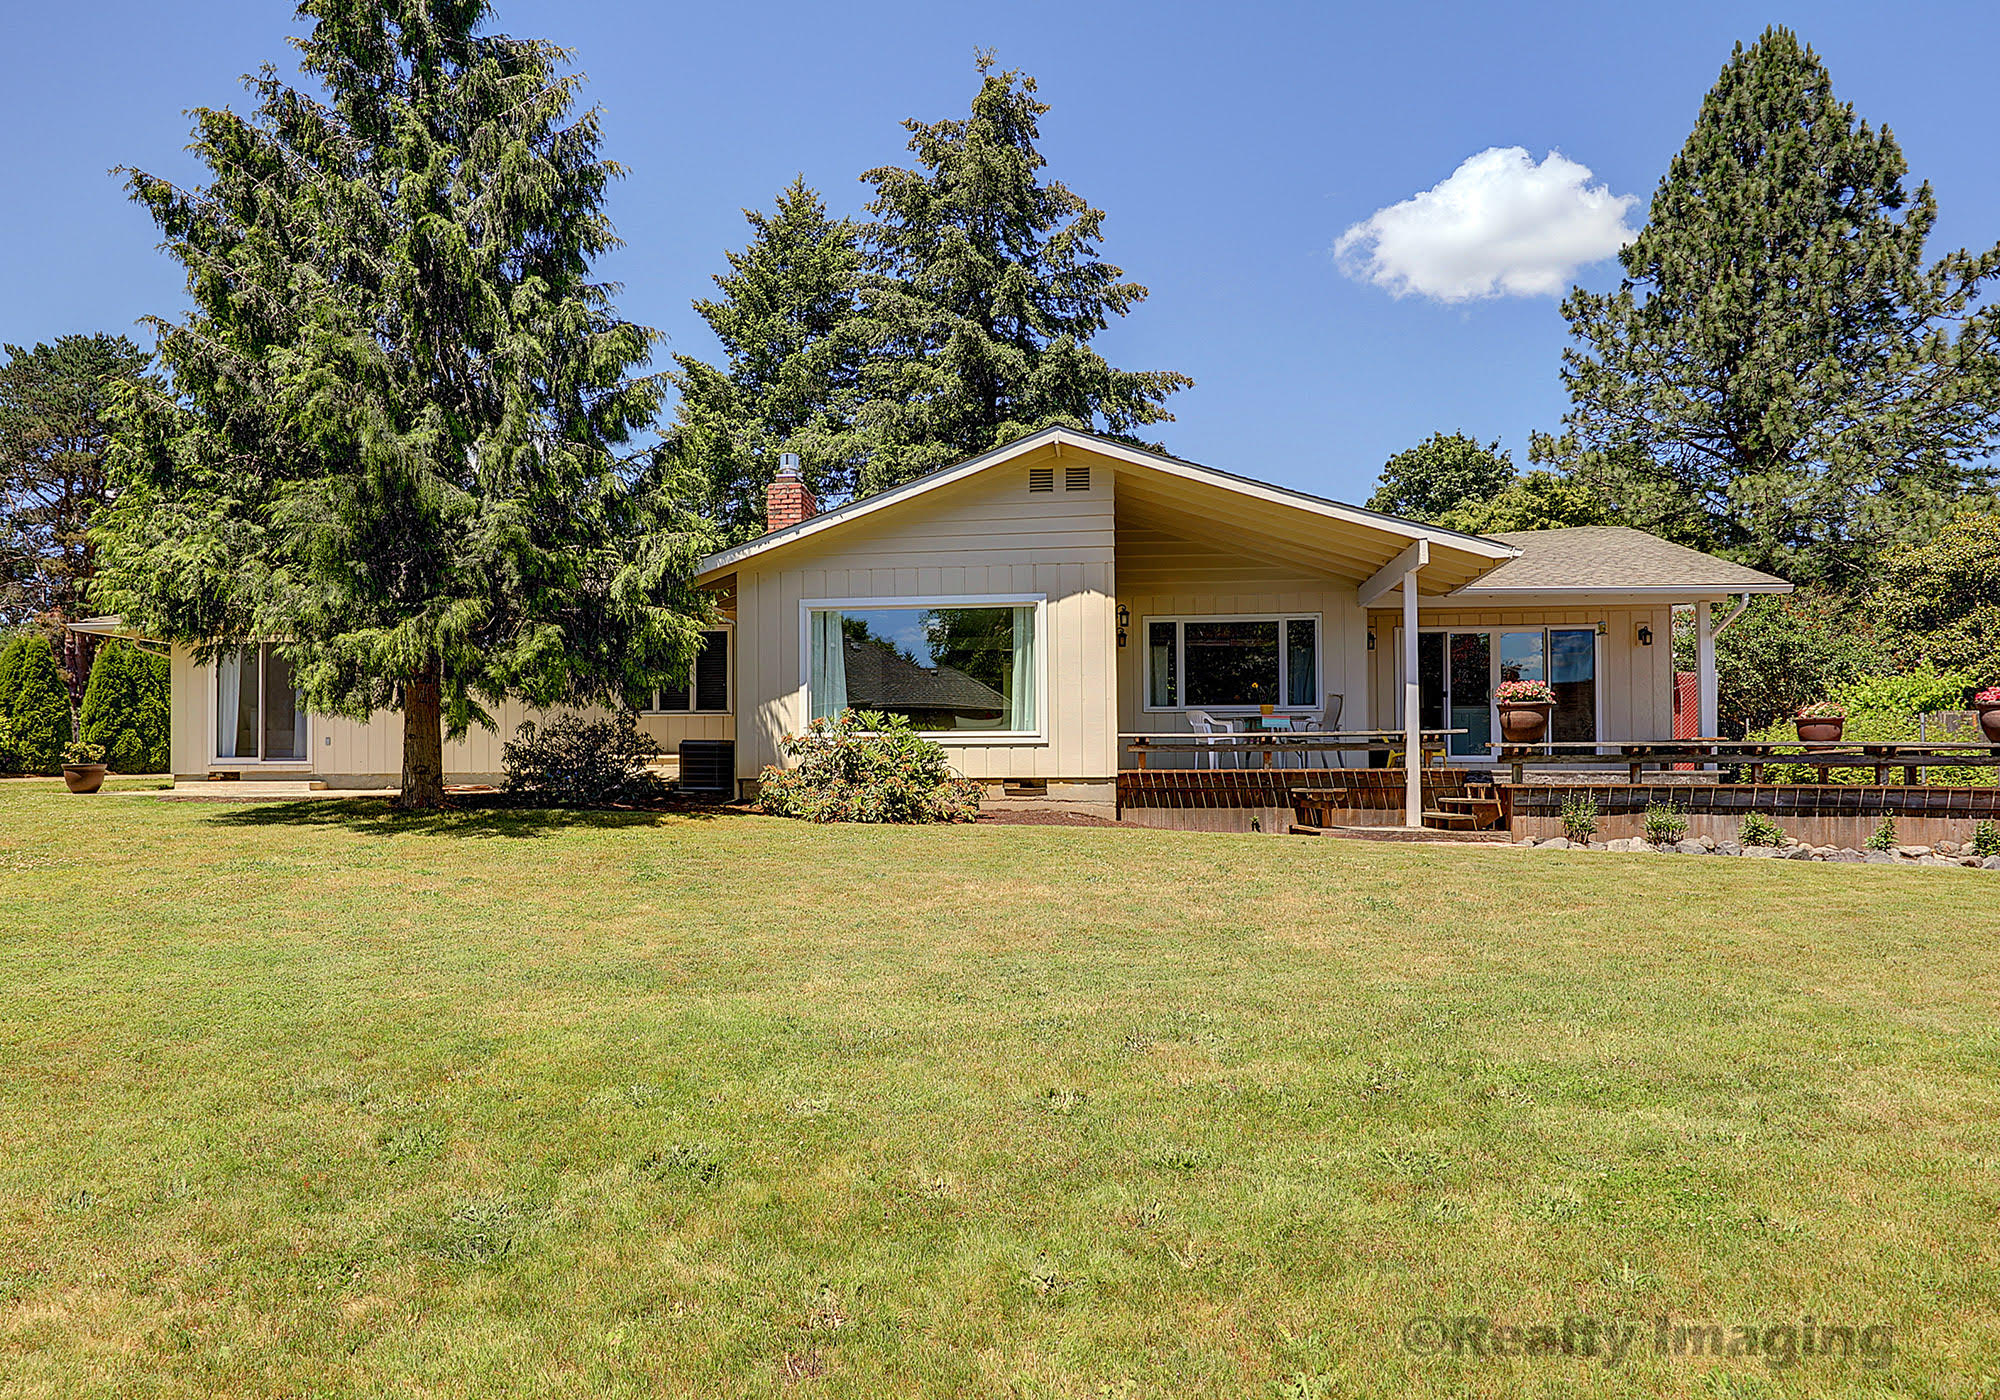 14560 SW 141st Ave., Tigard, OR 97224